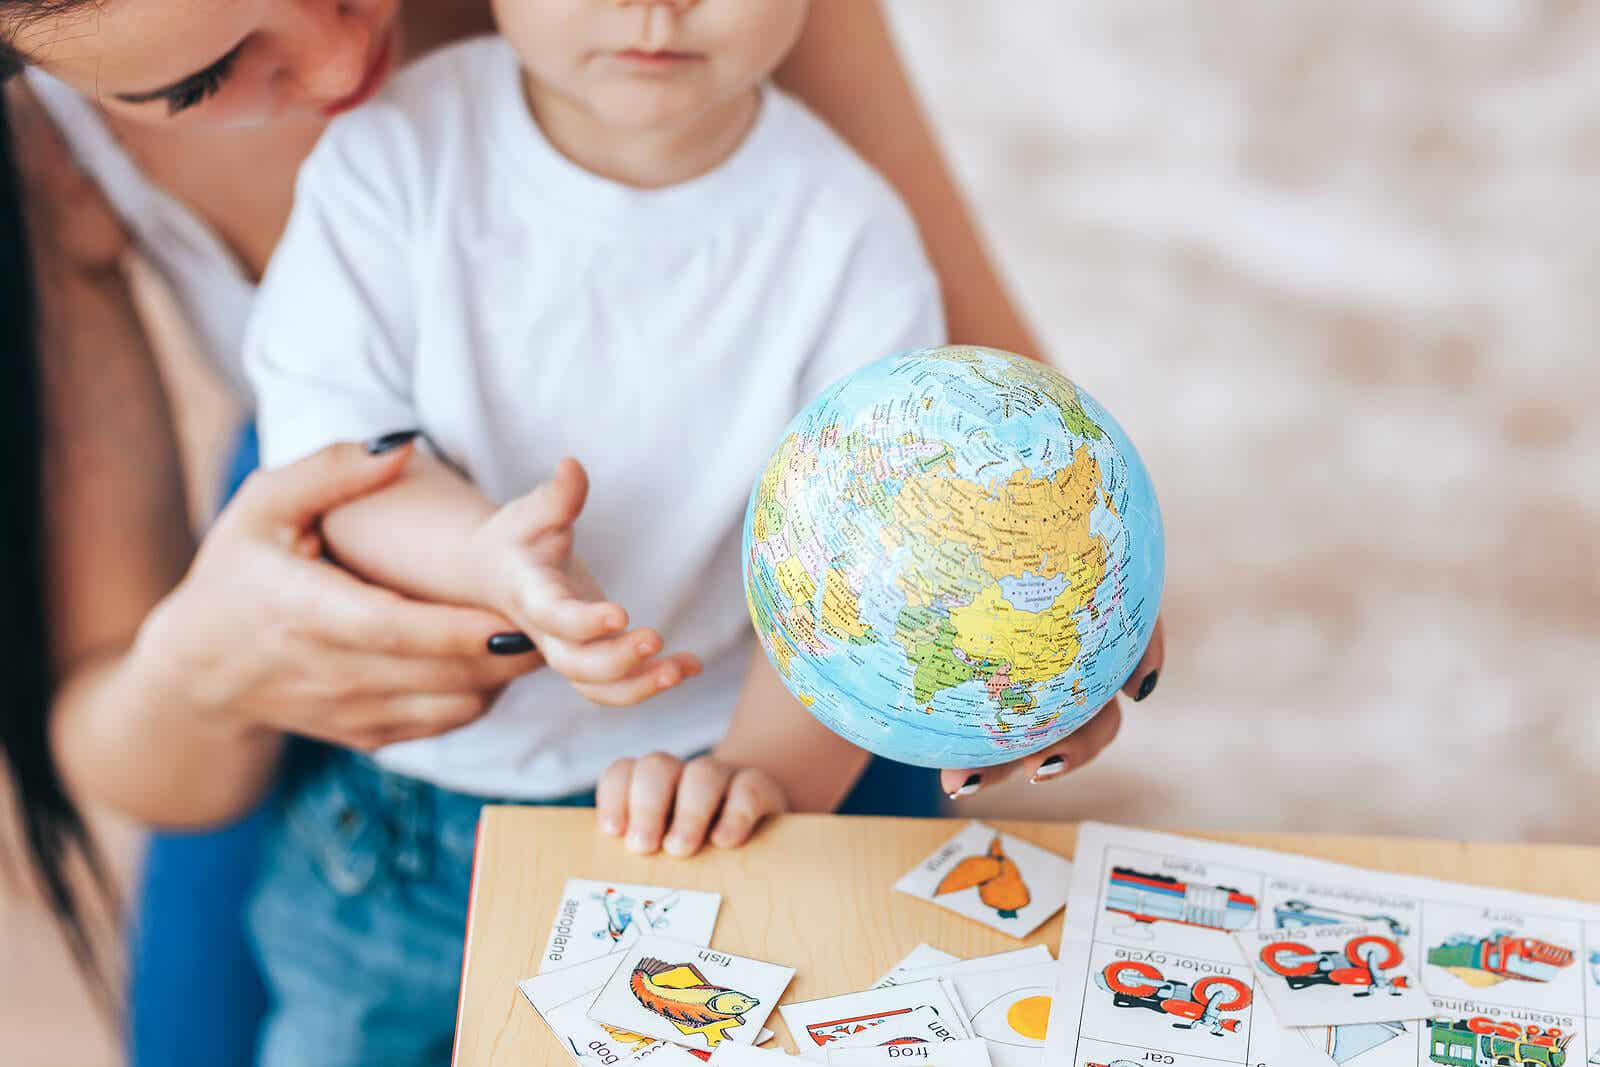 A mother showing a globe to her toddler son.